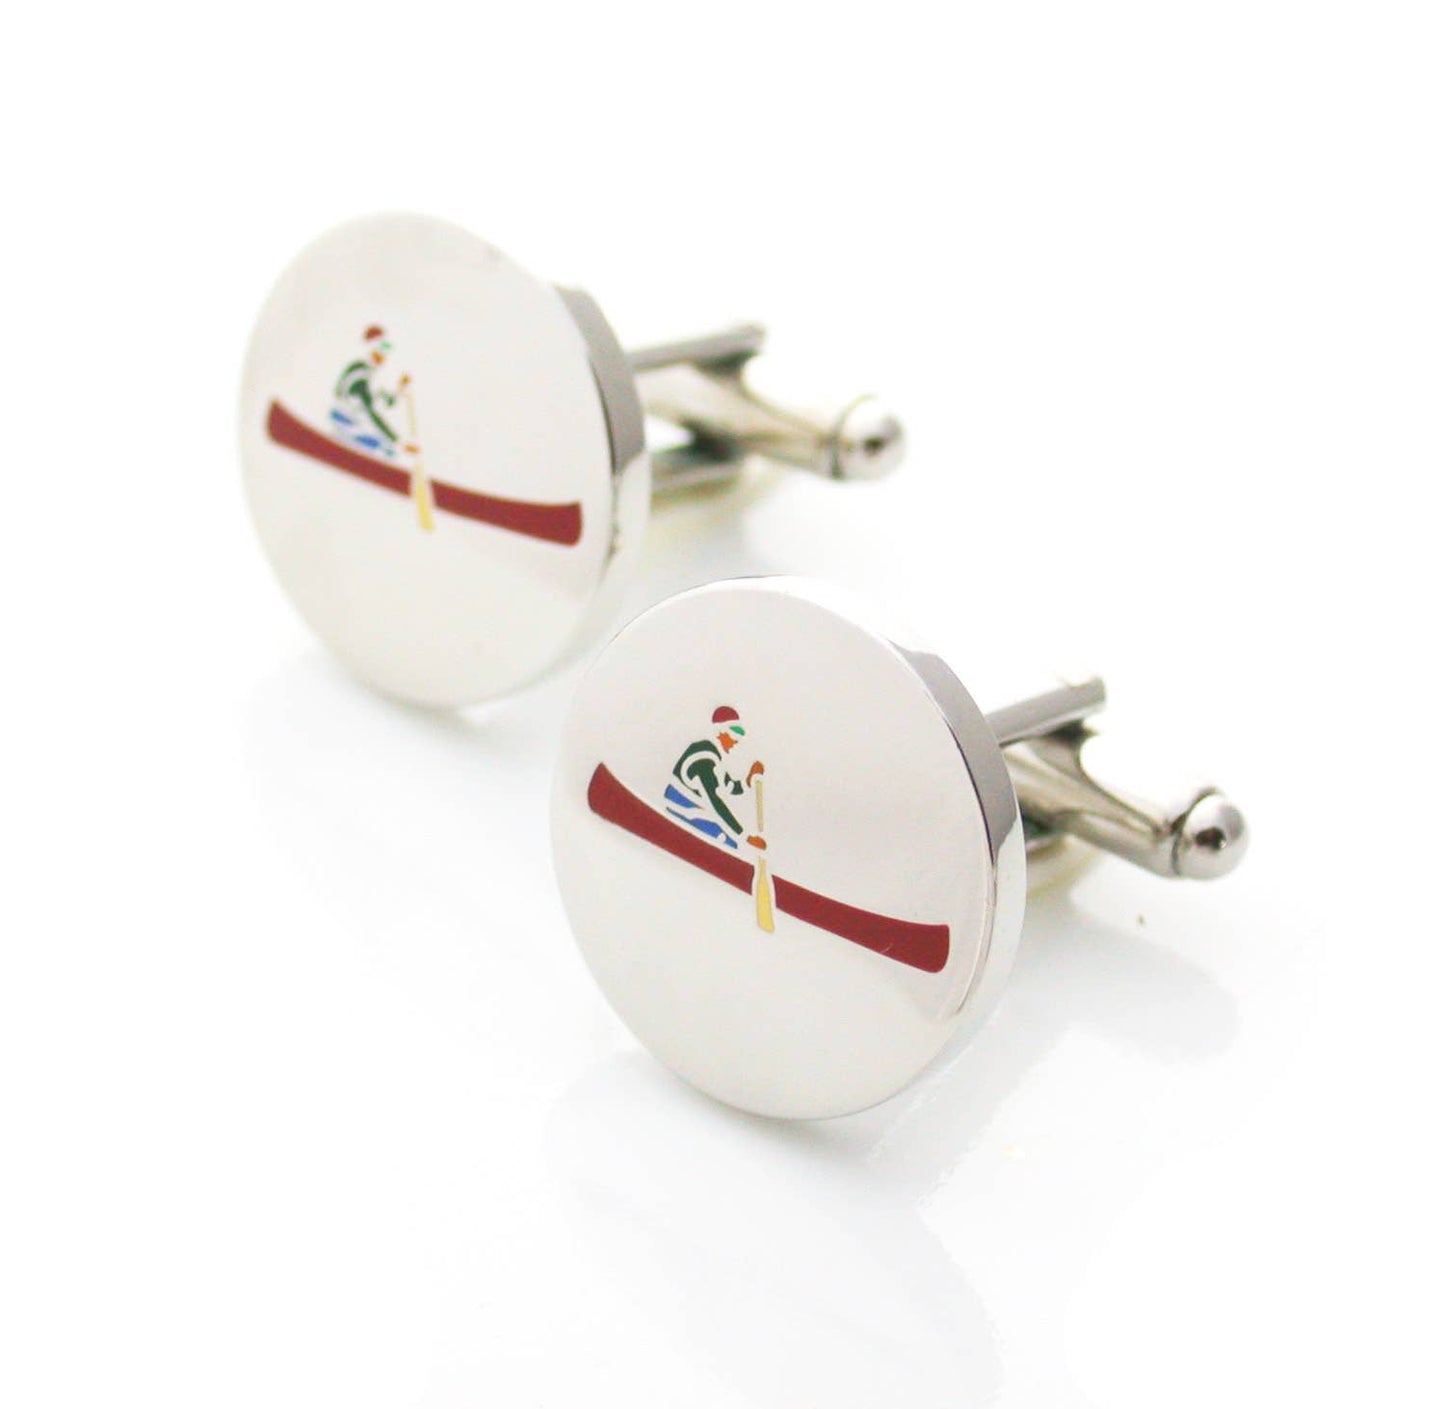 Round cufflinks with enamel canoe and paddler